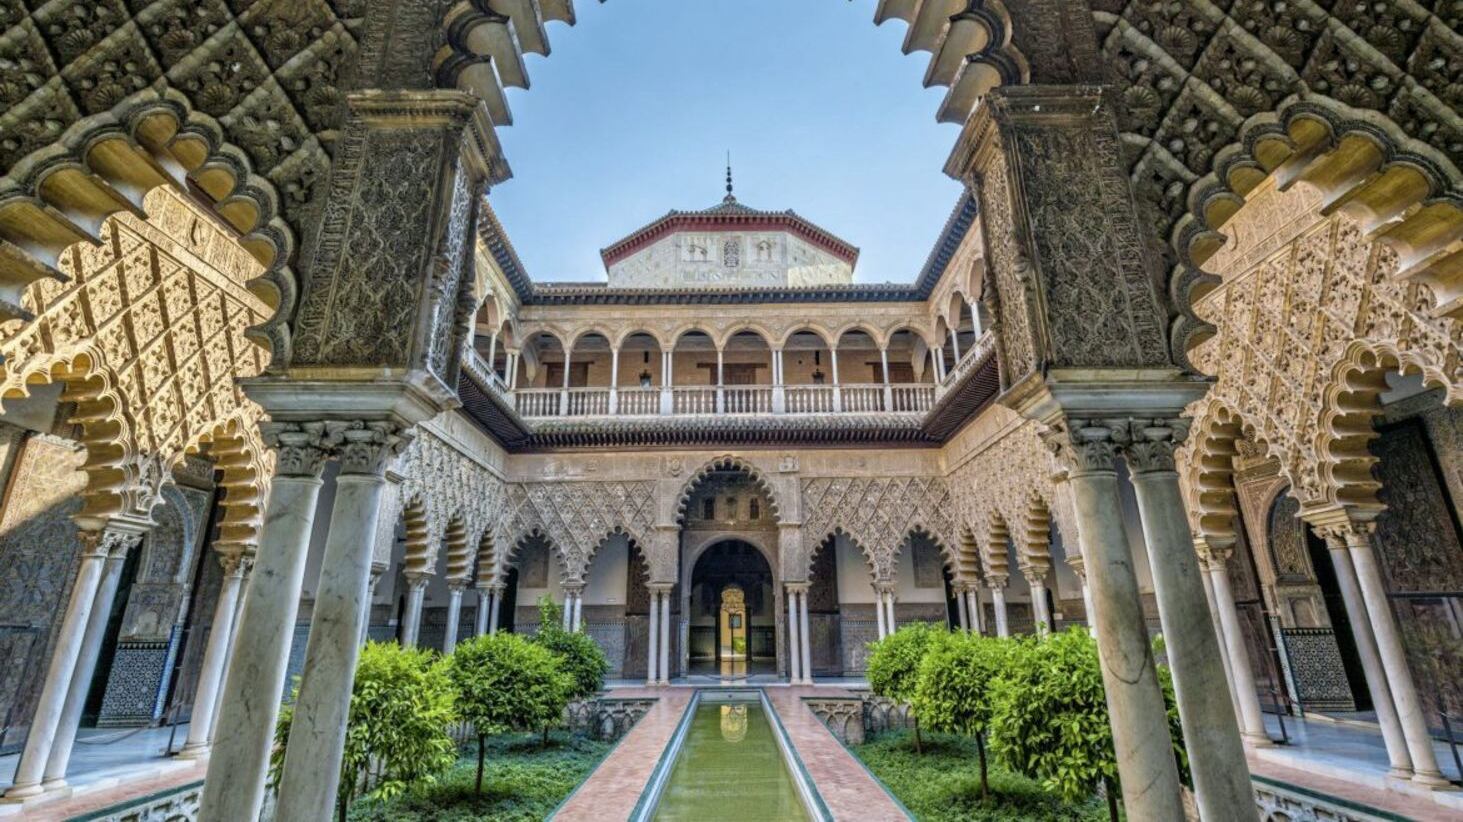 The Real Alcazar (Royal Palace) in Seville, a World Heritage Site where quotations from the Koran mix with Christian symbols 